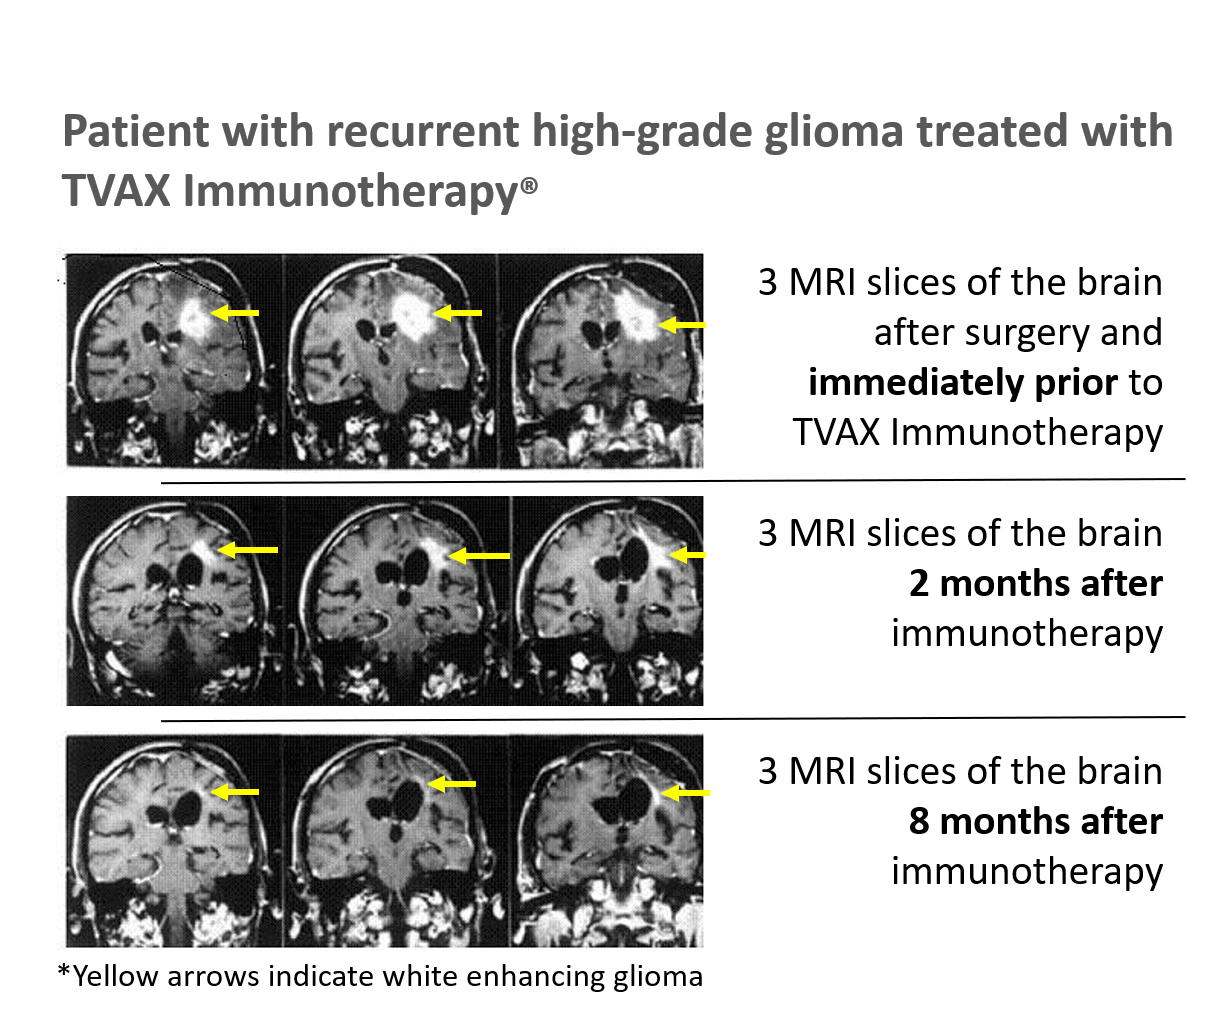 Patient with recurrent high-grade glioma treated with TVAX Immunotherapy